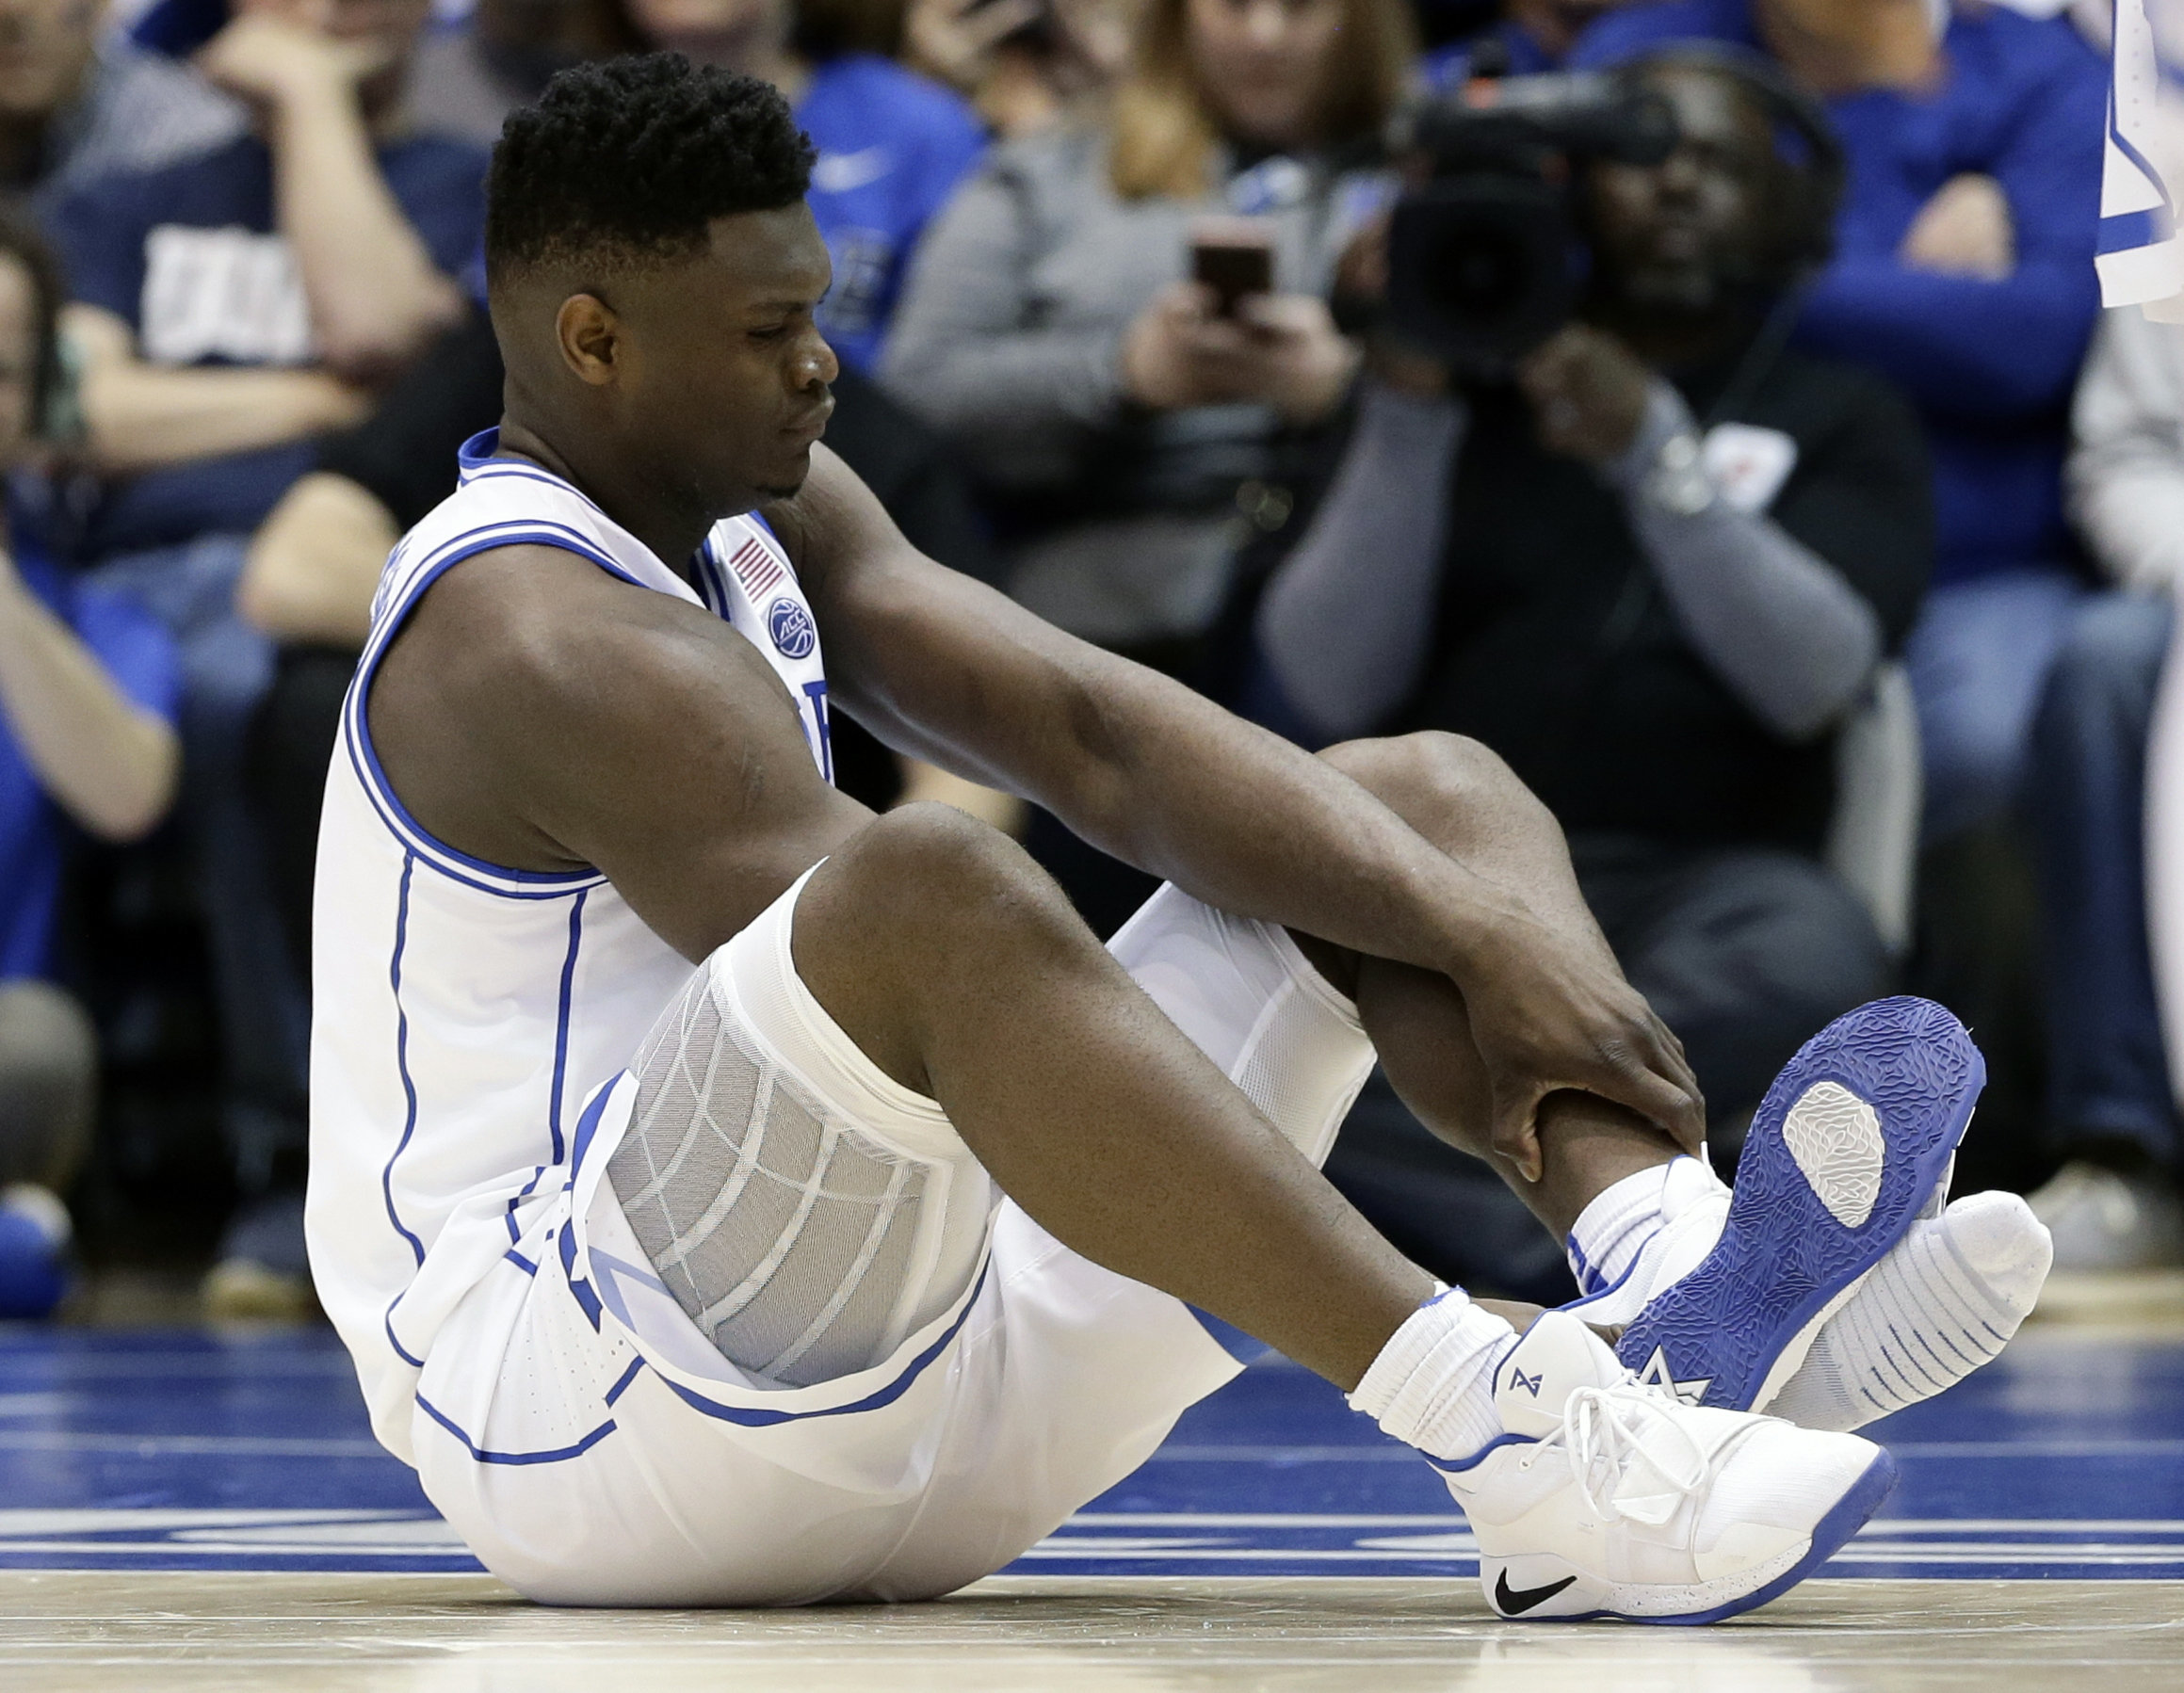 Nike is Zion Williamson's shoe never exploded